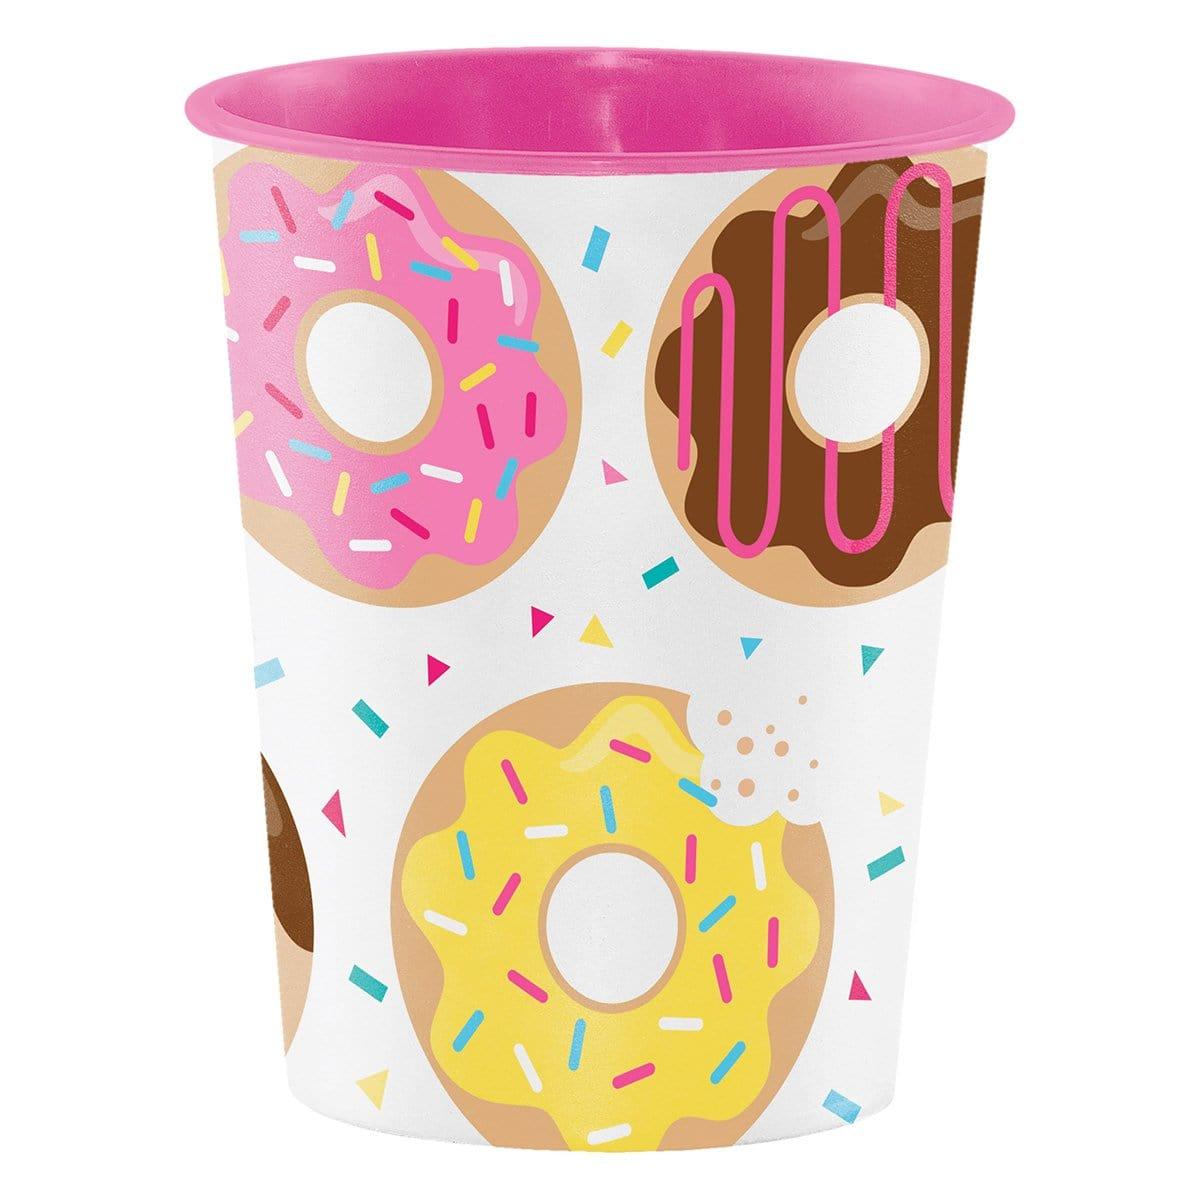 Buy Kids Birthday Donut Time plastic favor cup sold at Party Expert